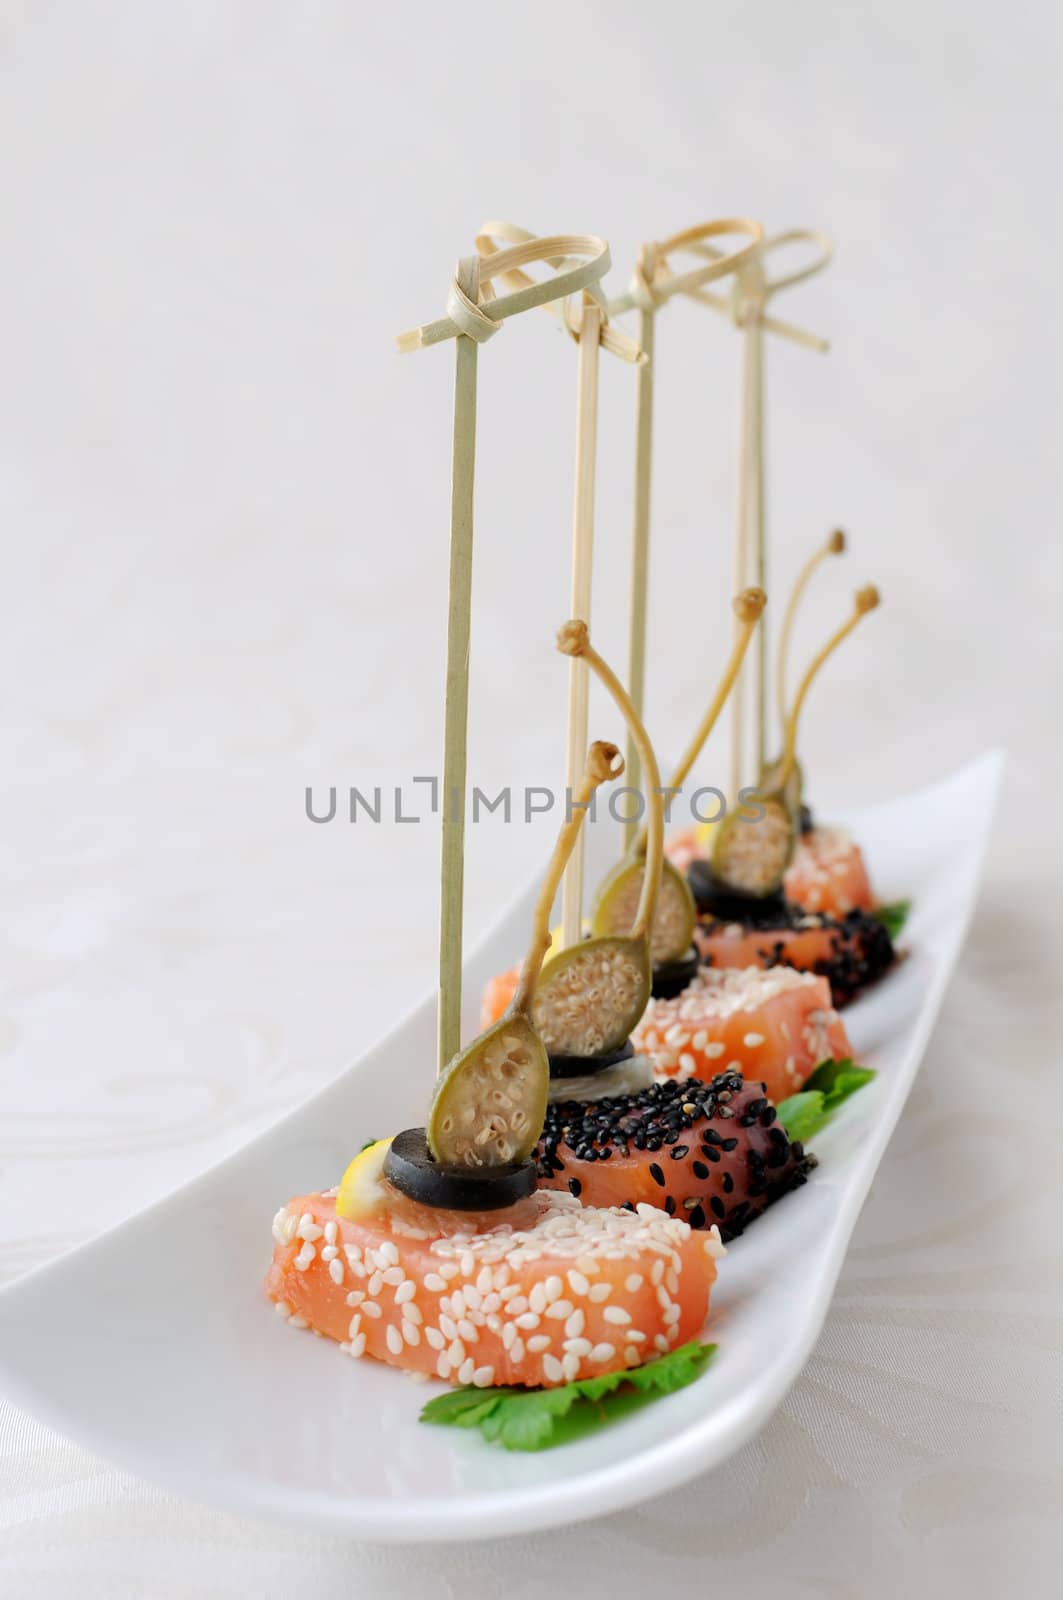 Appetizer of salmon in sesame, olives, lemon and capers